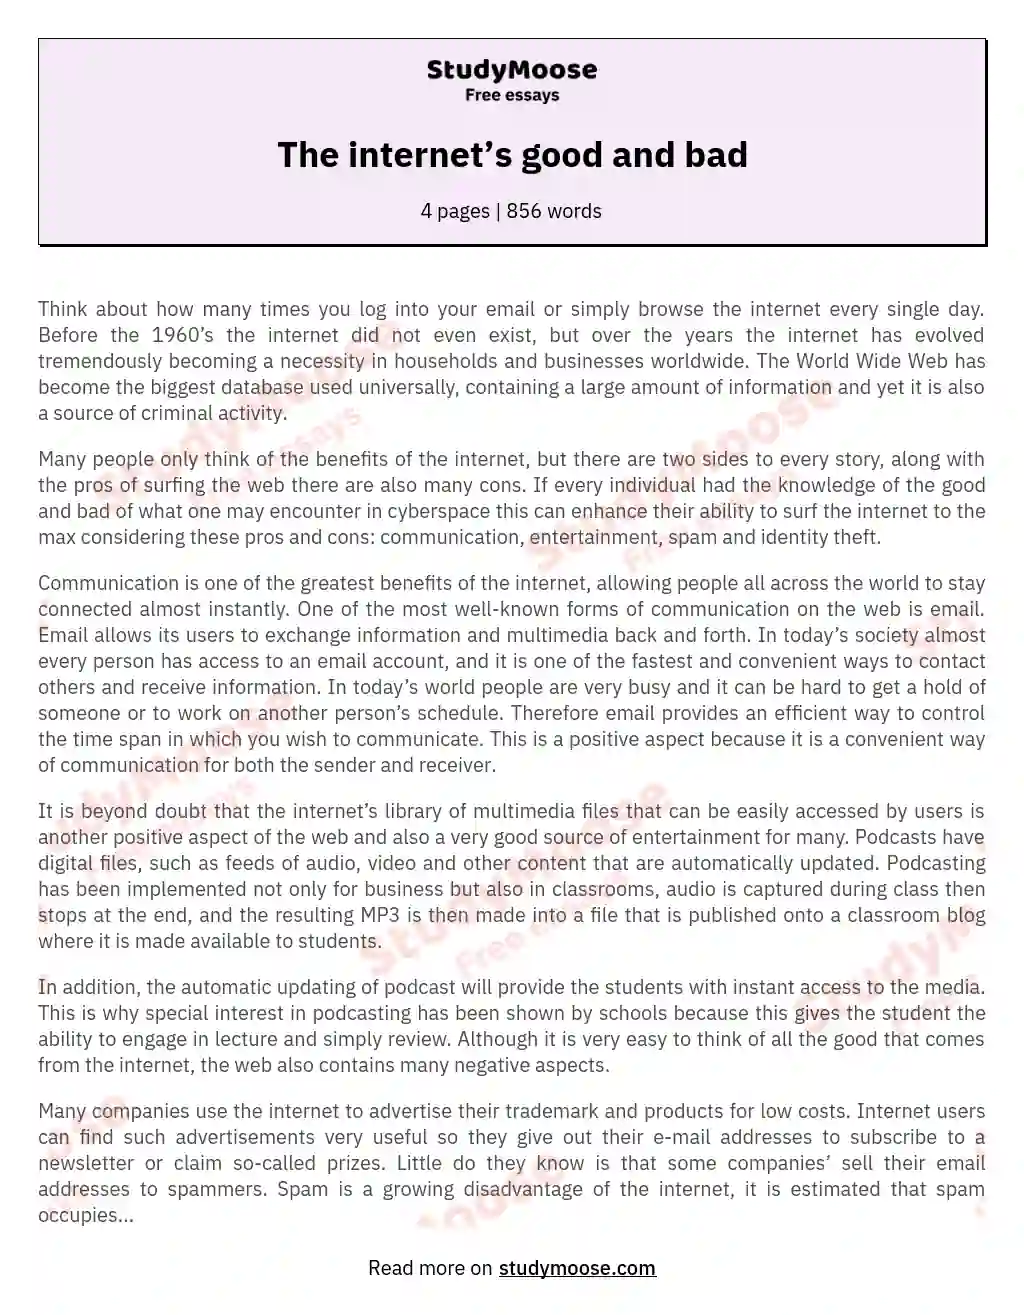 The internet’s good and bad essay